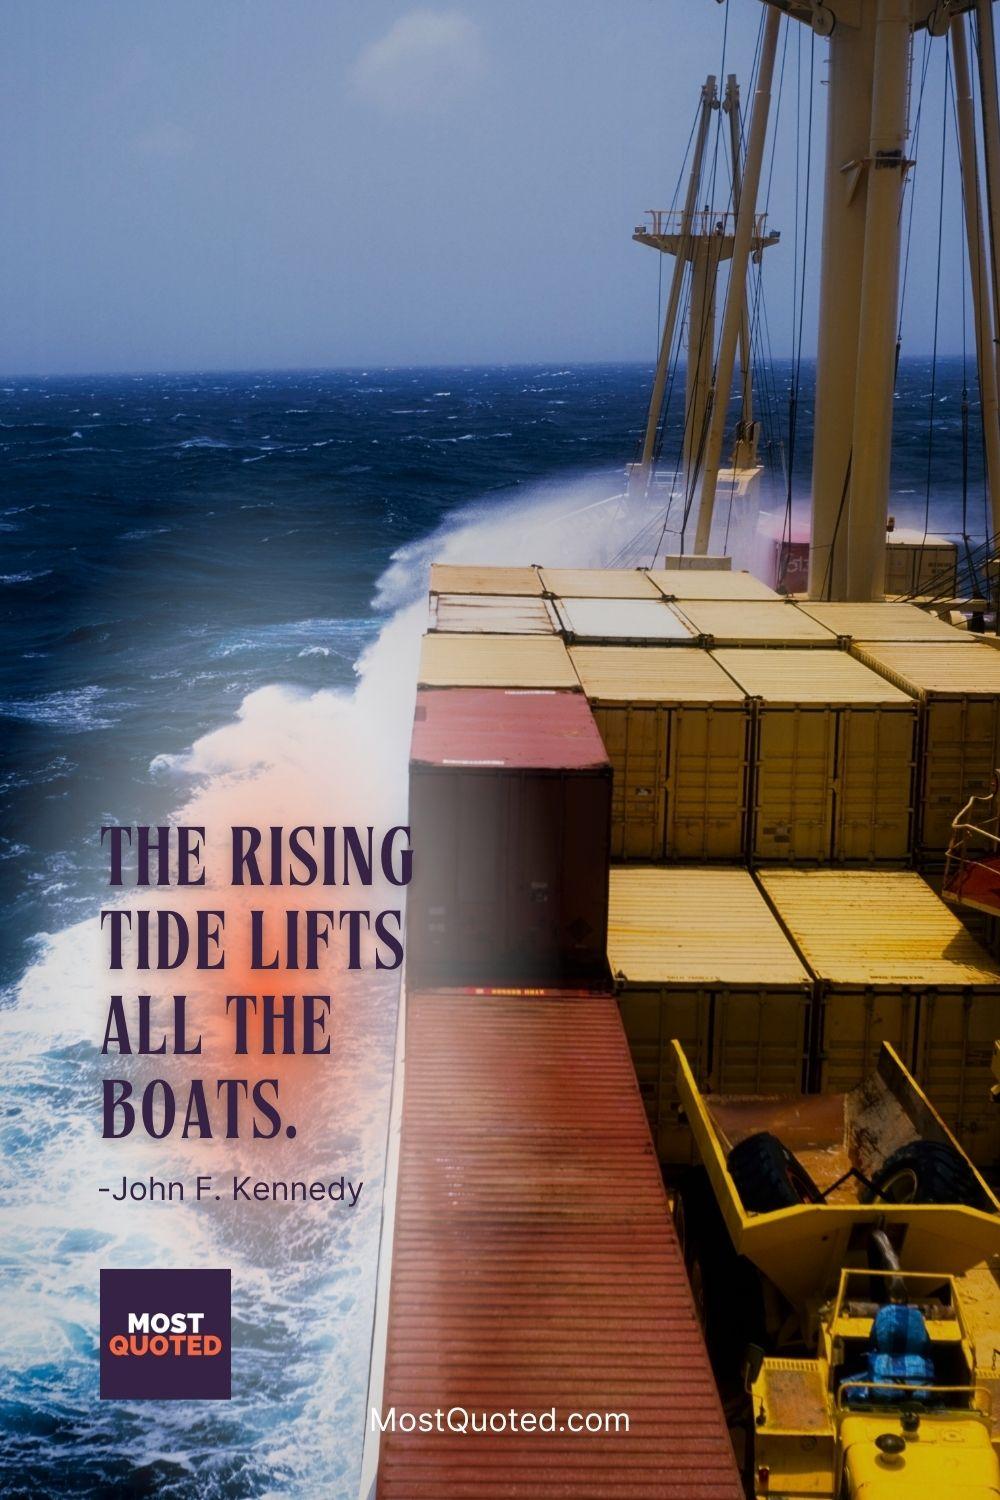 The rising tide lifts all the boats. - John F. Kennedy